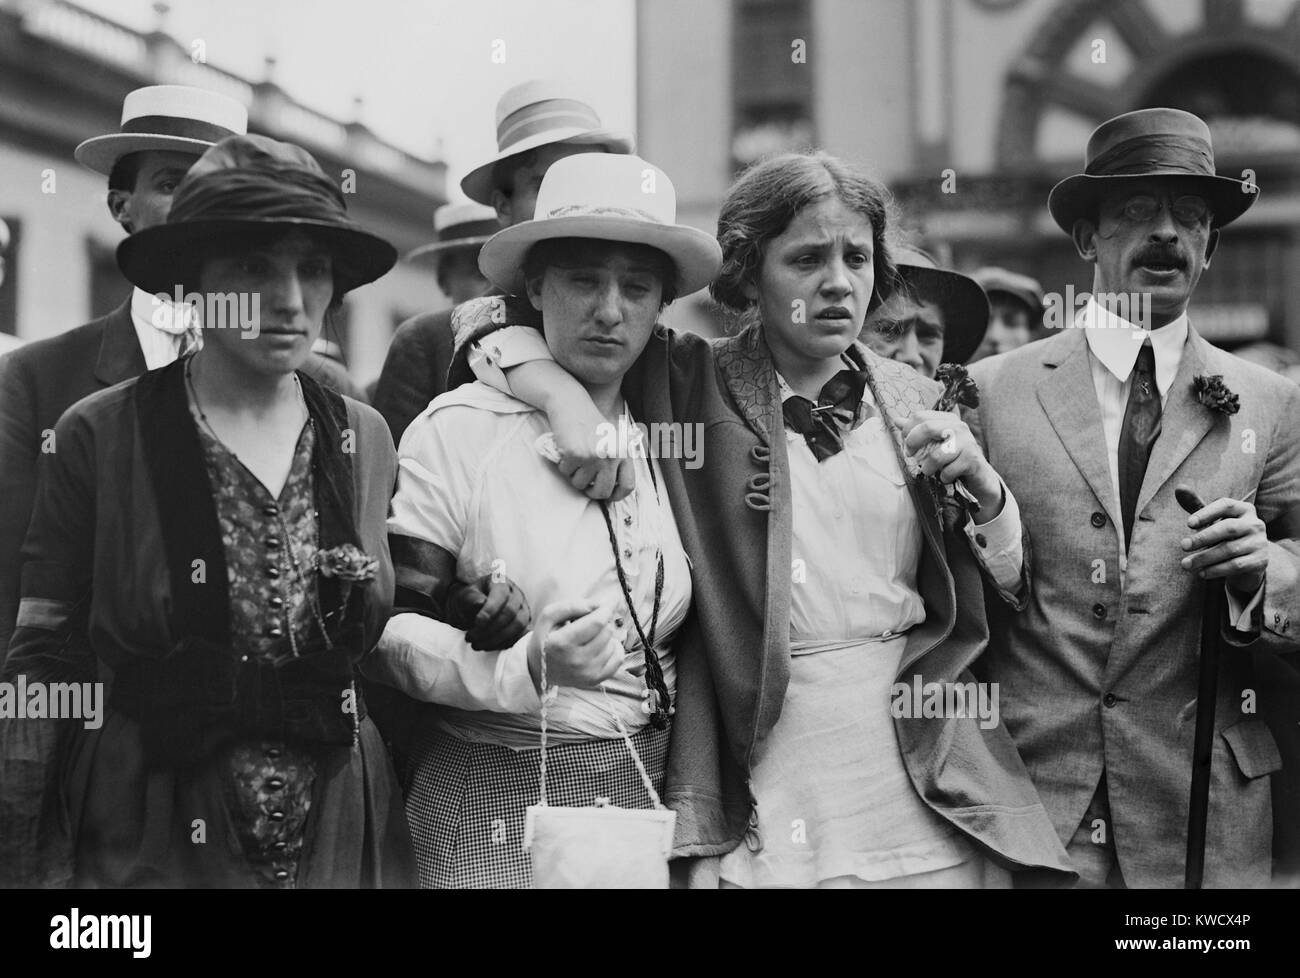 Anarchist Group in New York City in 1914. L-R: Lillian Rubel, Becky Edelson, Louise Berger, and Alexander Berkman. Edelson had recently spent 27 days in Blackwells Island on a Hunger Strike. Louise Bergers apartment was housing a bomb factory that exploded, killing 4, including her brother-in-law, on July 4, 1914. Berkman was still on probation for the attempted murder of Henry Frick (BSLOC 2017 2 166) Stock Photo